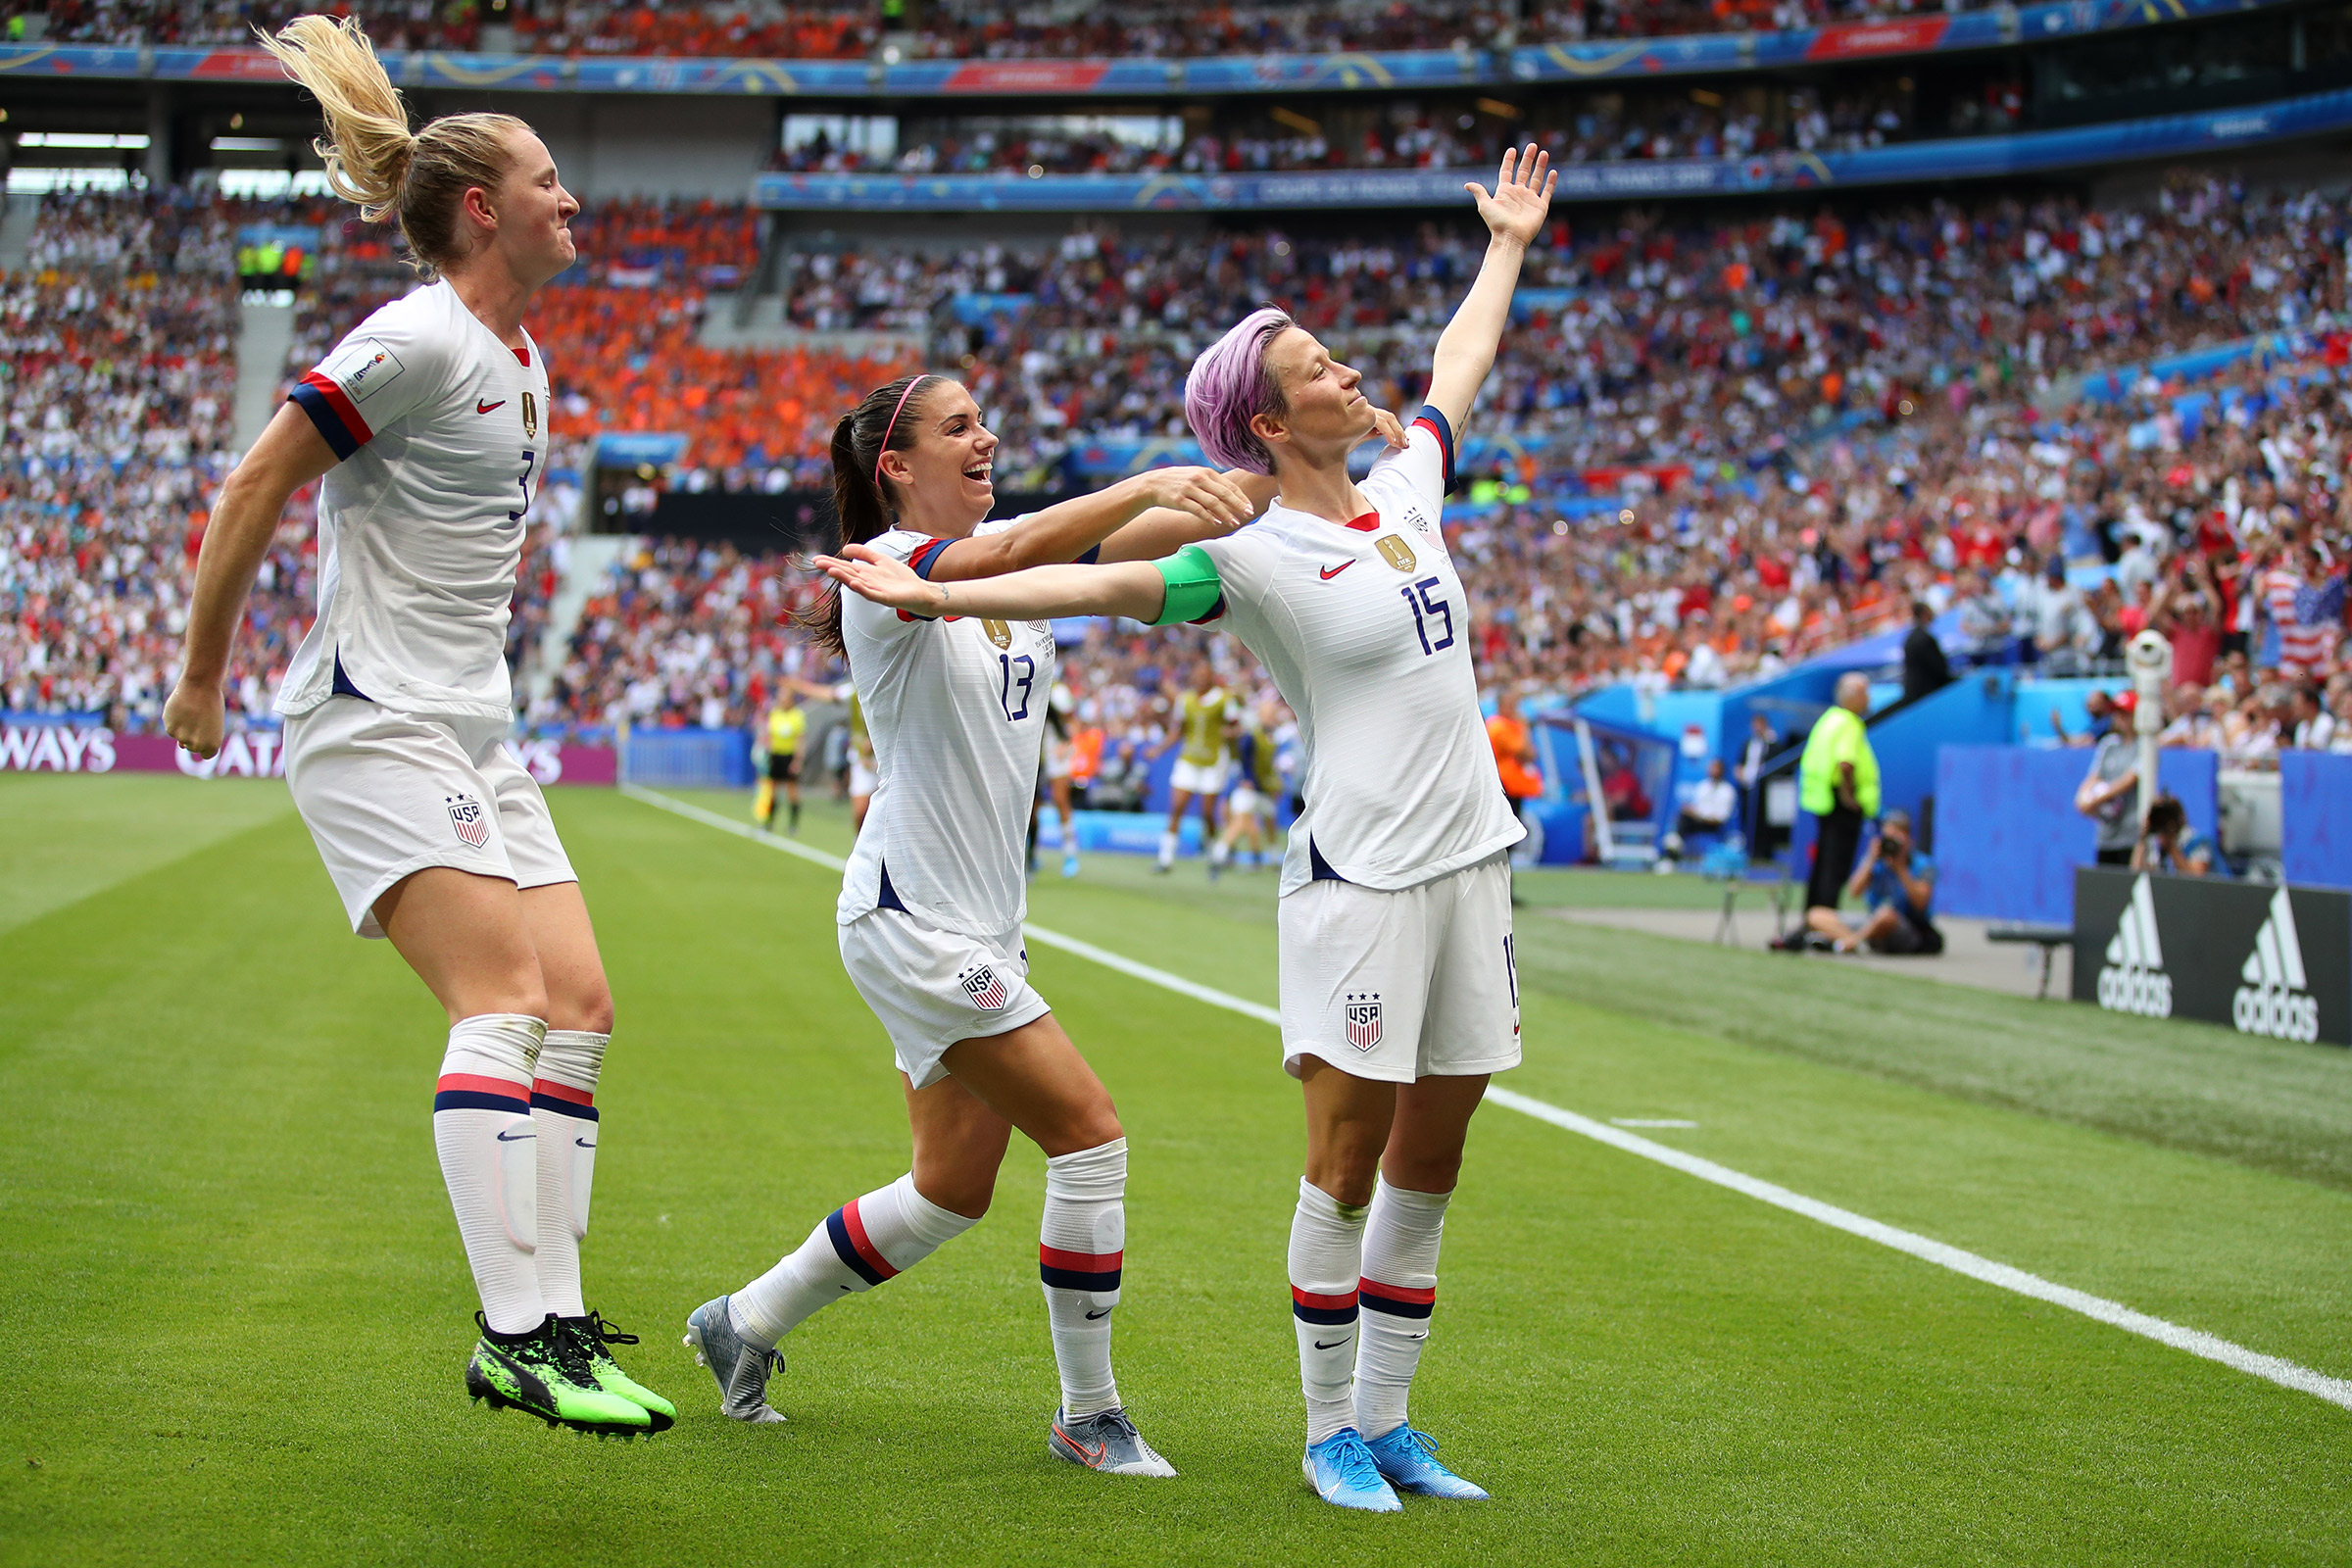 Striking her pose after scoring in the 2019 World Cup Final (Richard Heathcote—Getty Images)